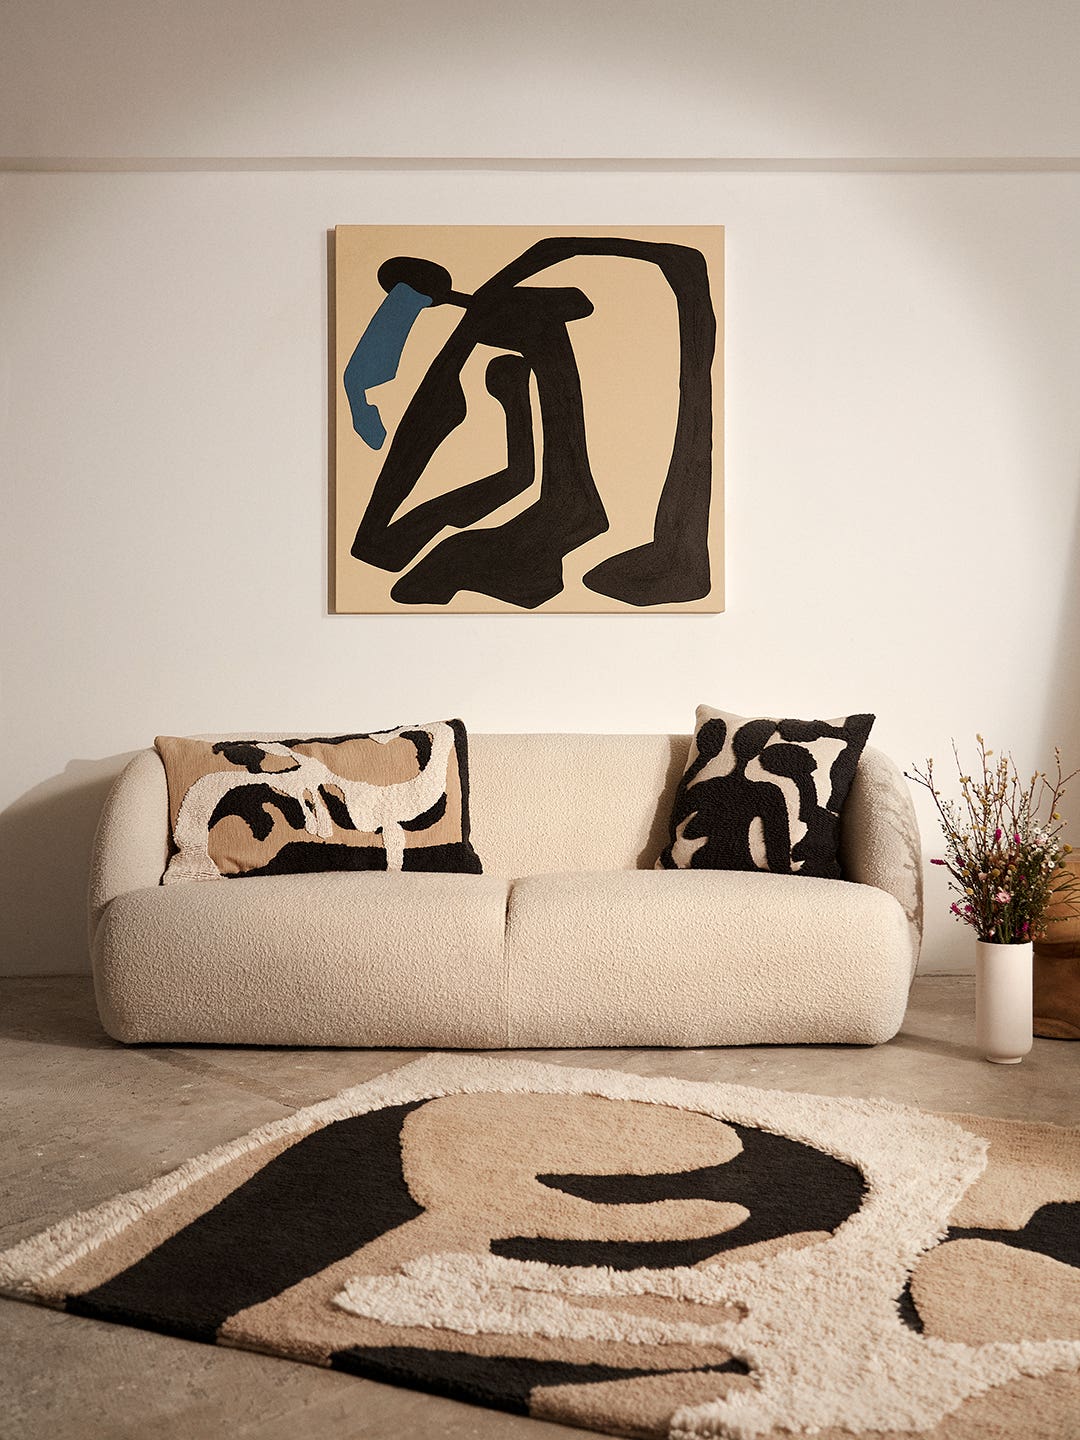 Forget the Walls—This H&M Home Collab Is Putting Art on Area Rugs